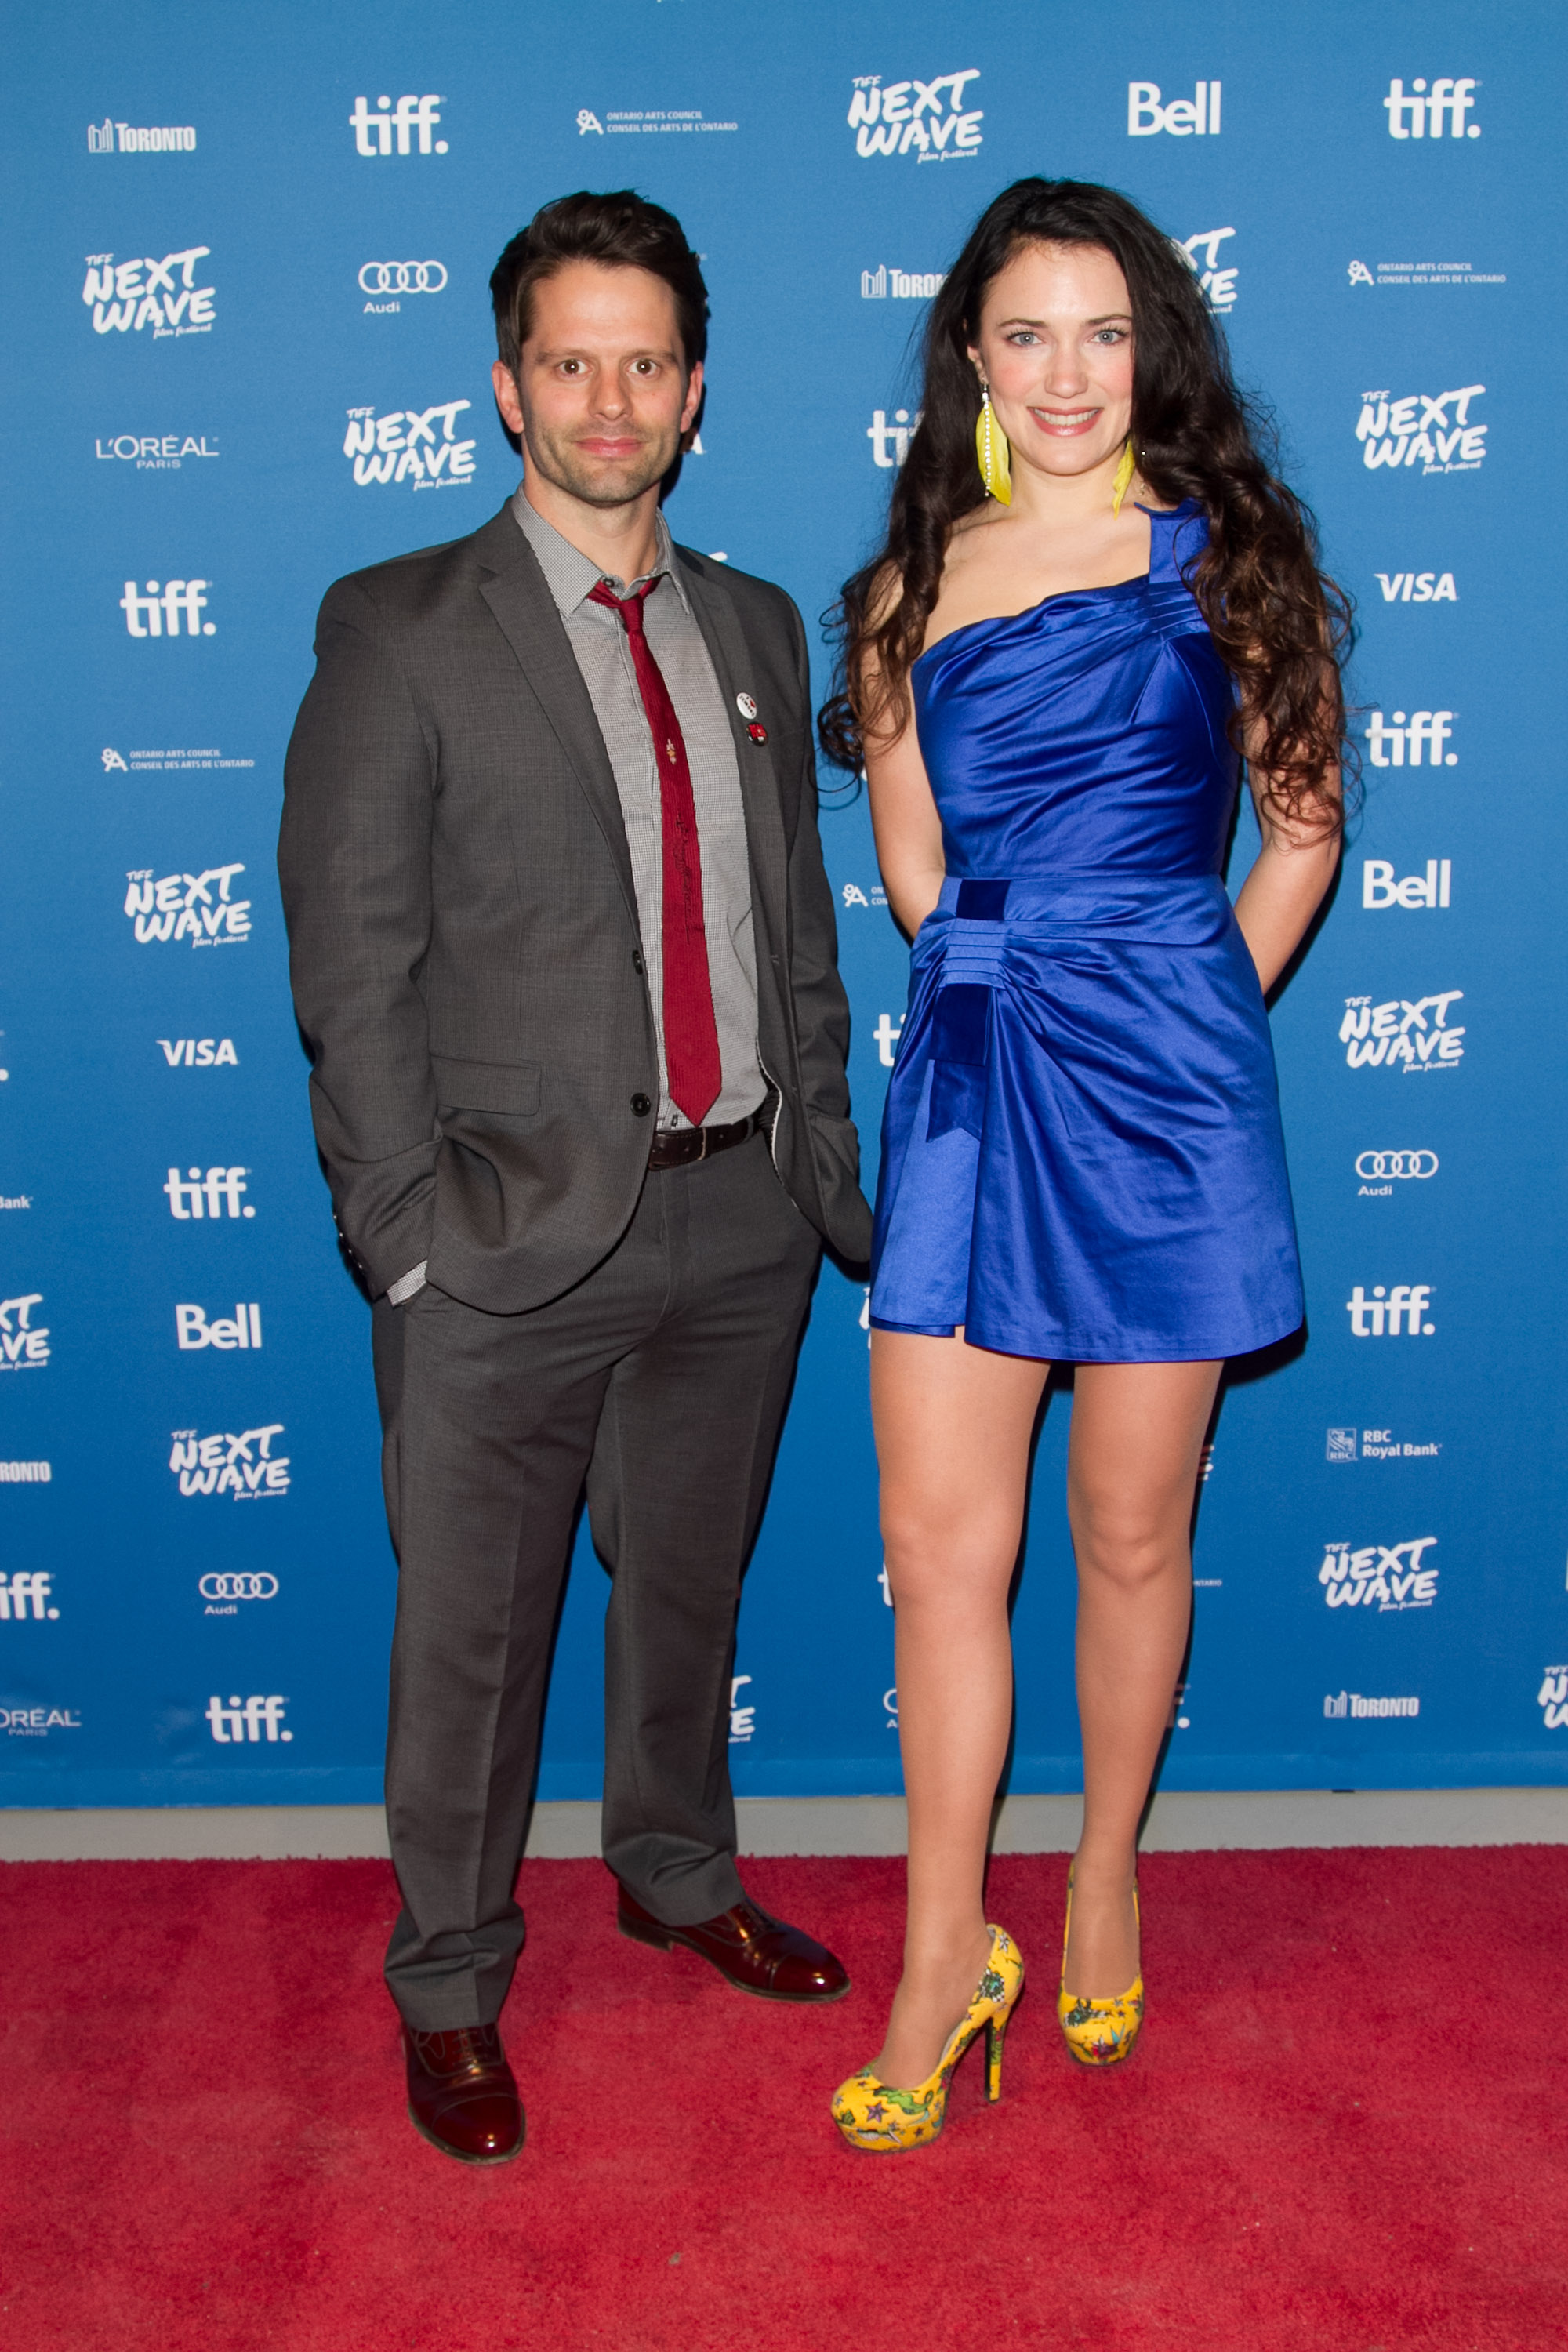 Filmmakers April Mullen (Director/Actress) and Tim Doiron (Actor/Writer) arrive to the North American Premiere of Dead Before Dawn 3D. Tiff Bell Lightbox, TIFF Next Wave Film Festival - Closing Night Film.